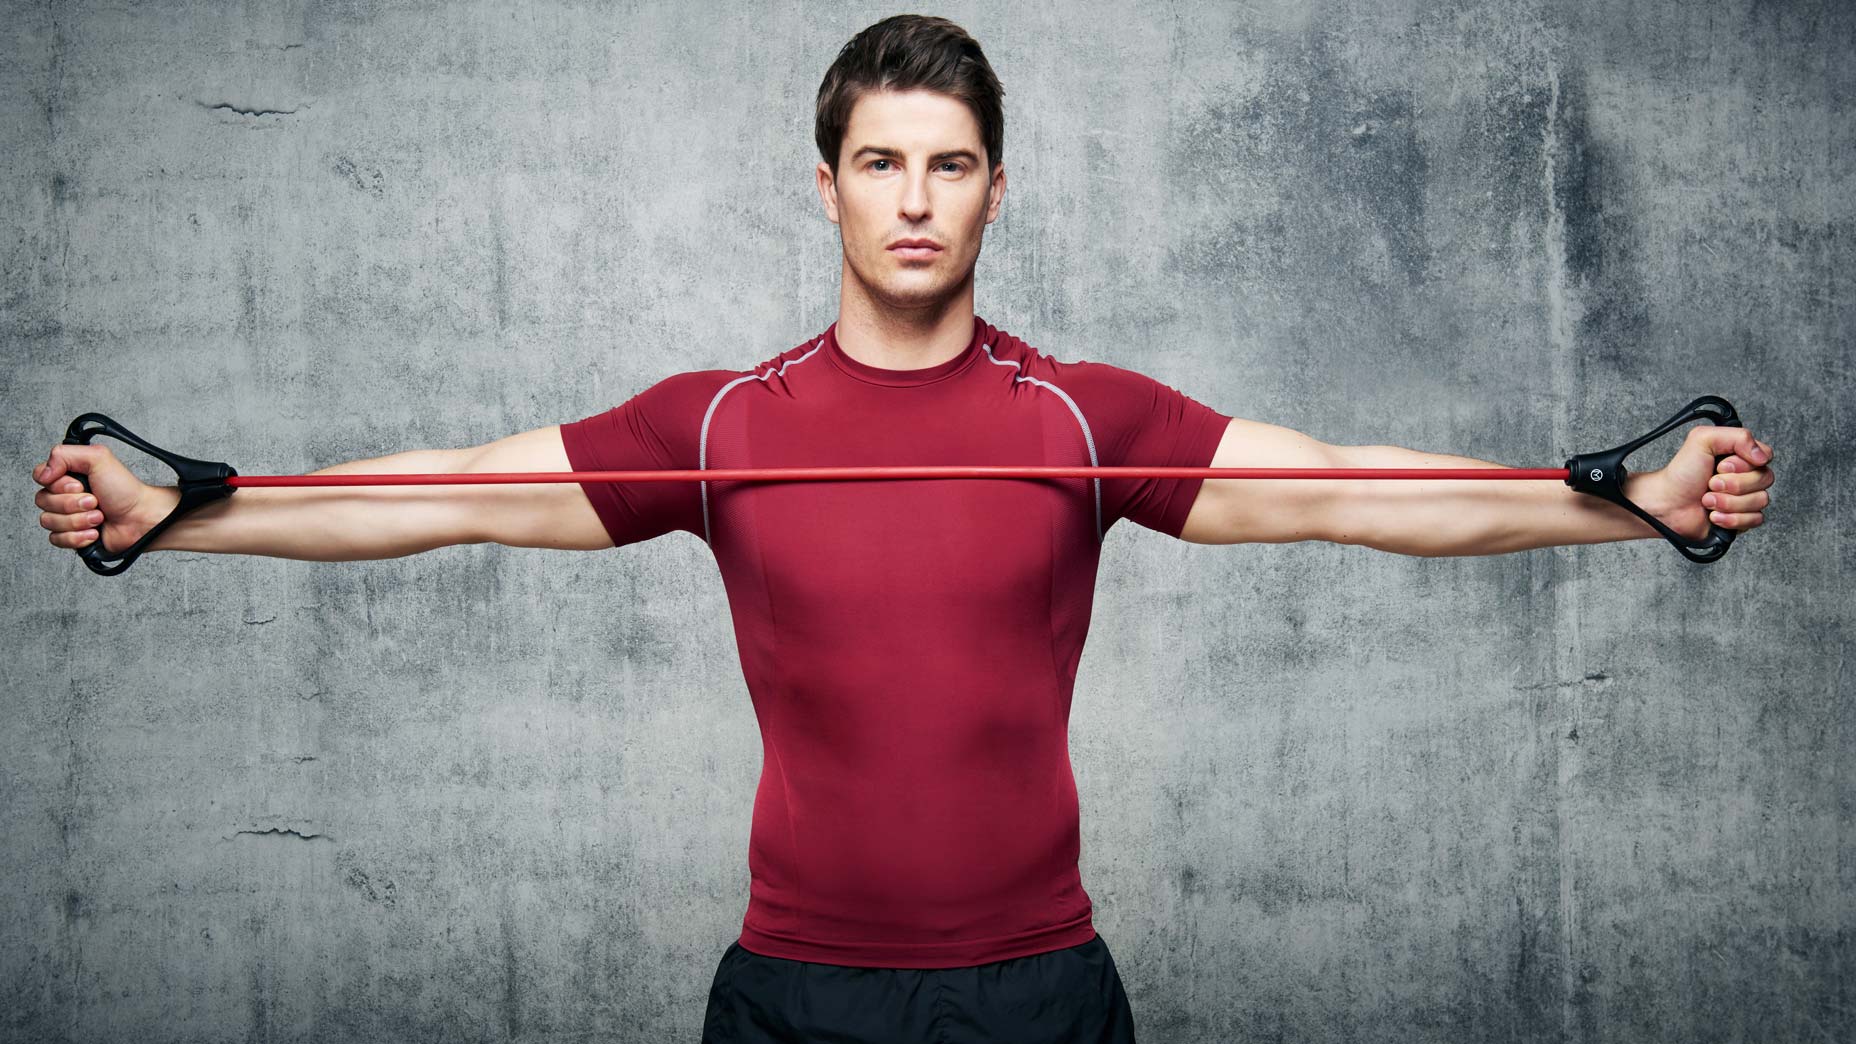 How to use an exercise band to improve your swing